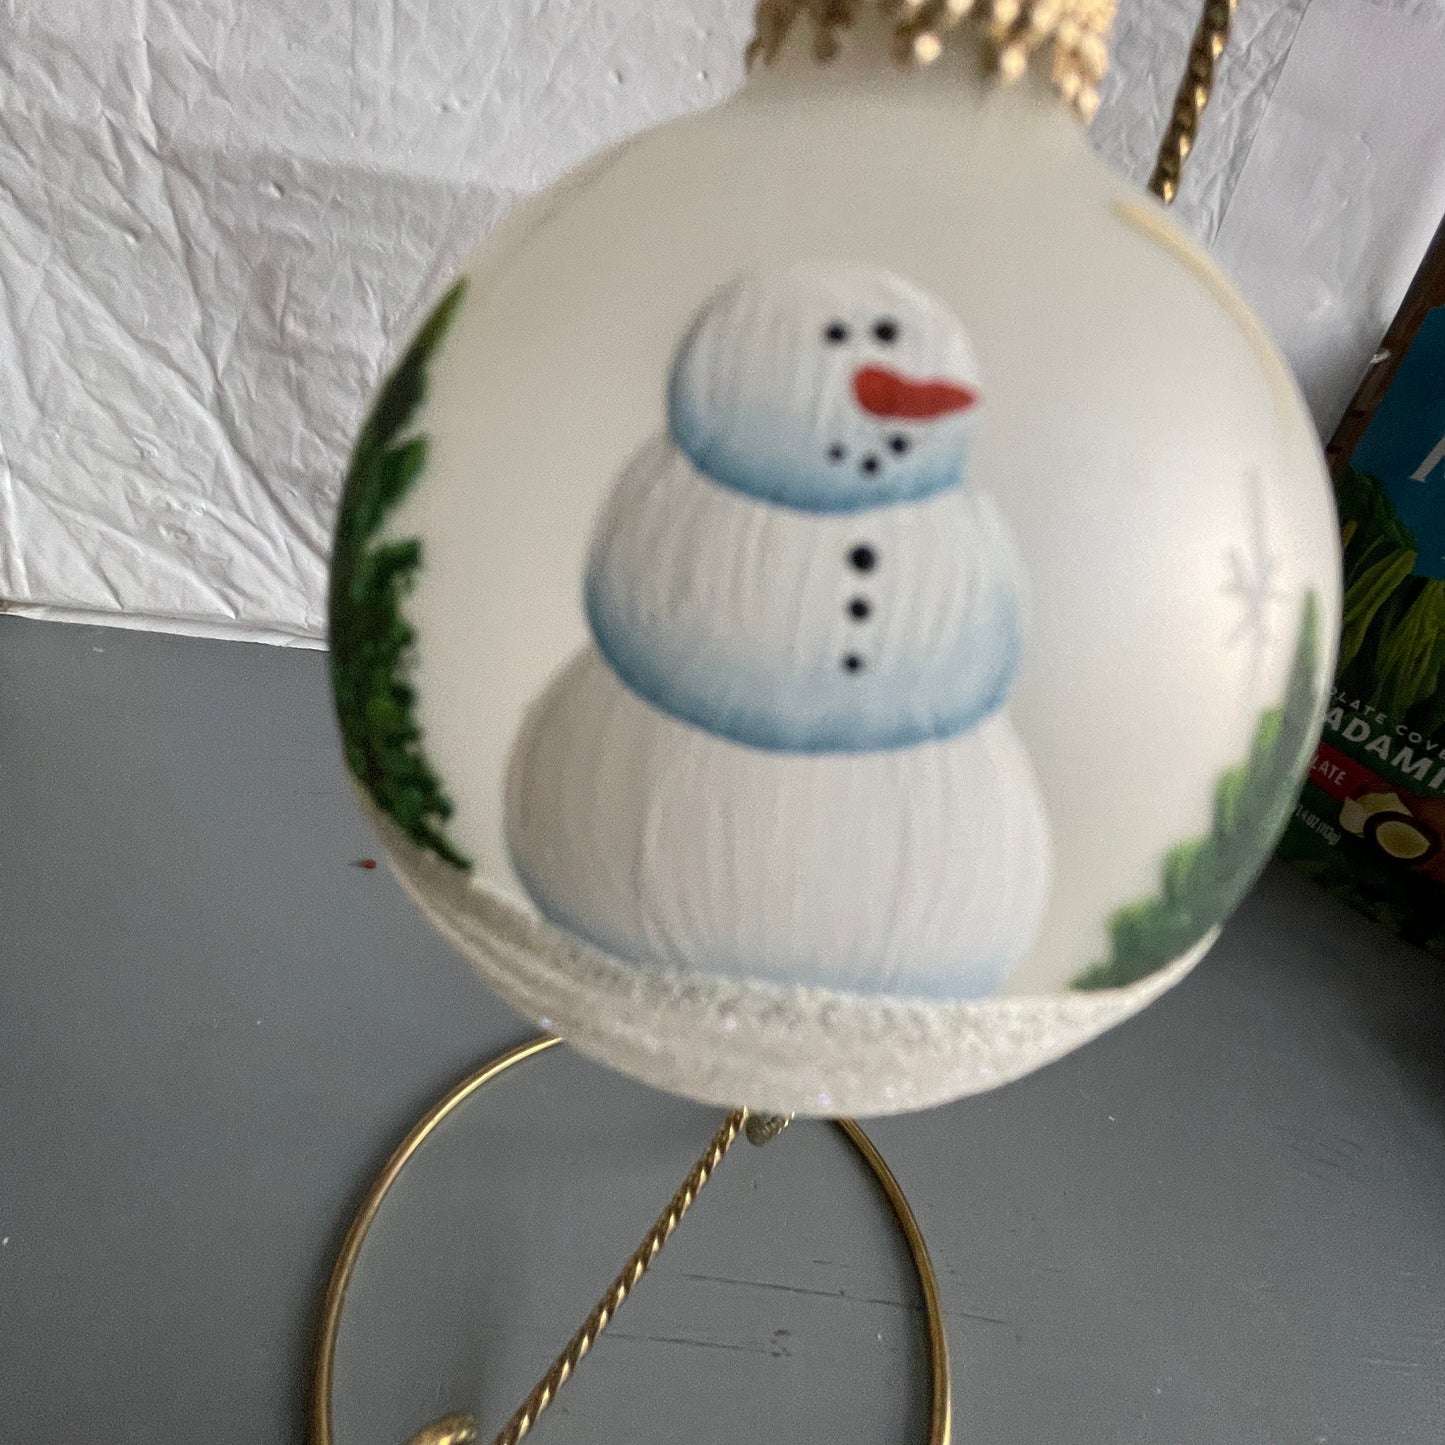 Thelma Hamilton Frosty Snowman with Evergreen Trees Hand-painted Vintage Glass Ball Ornament